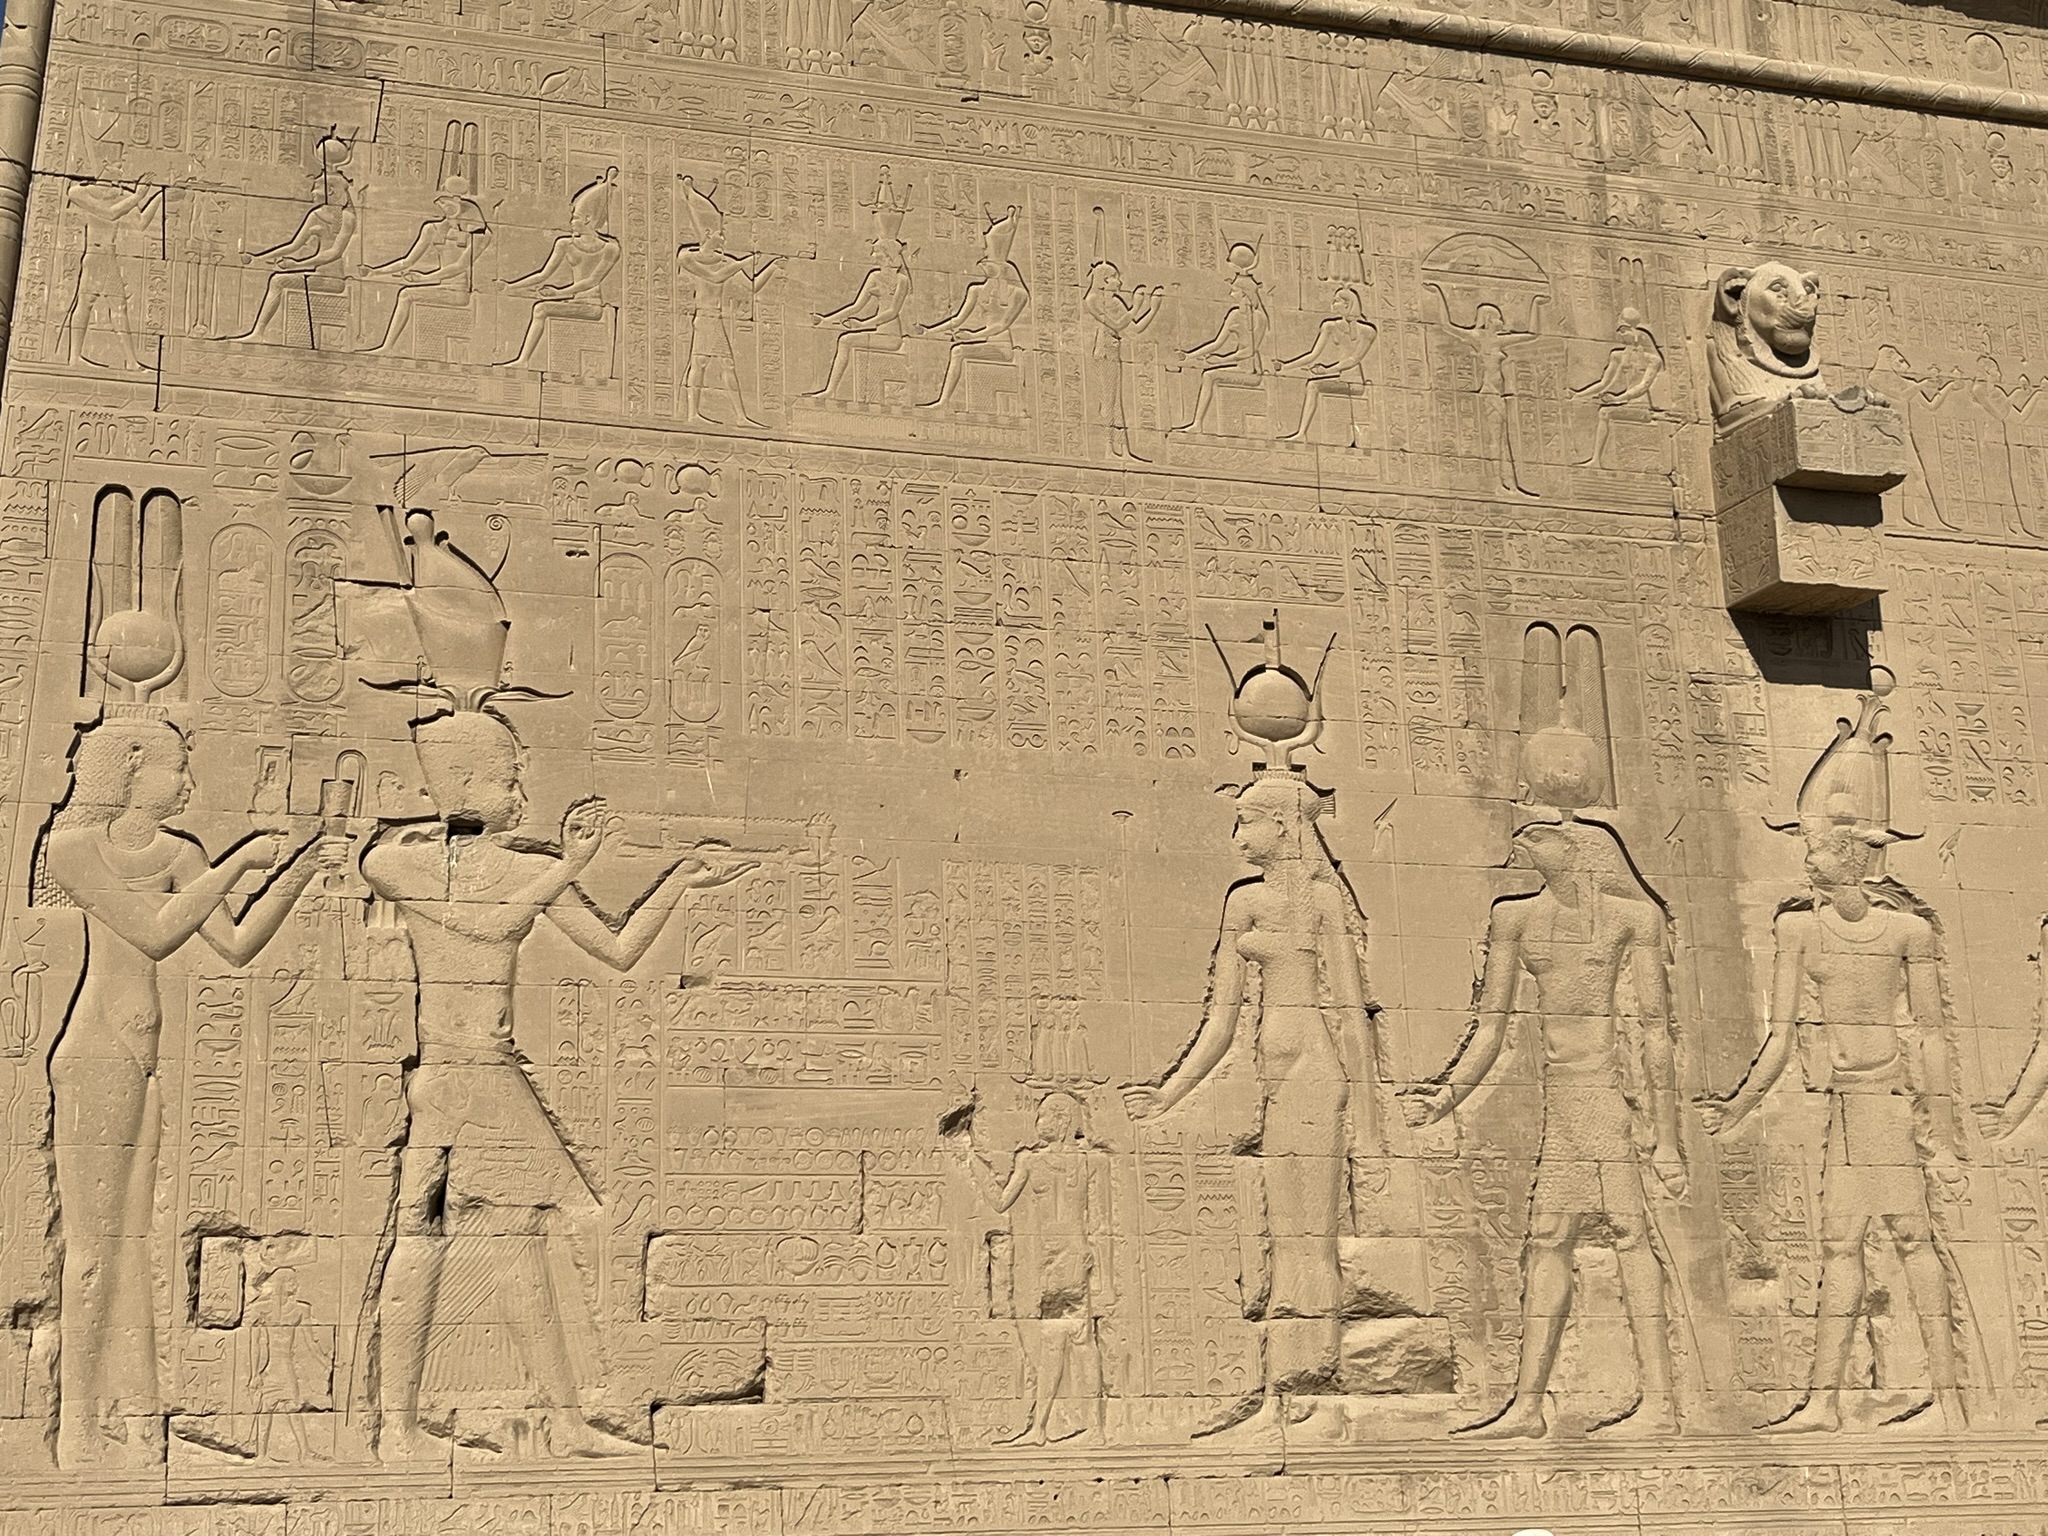 Back wall of Denderah Temple showing Cleopatra VII (far left) behind small Caesarean who is behind larger "ka" of Caesarean